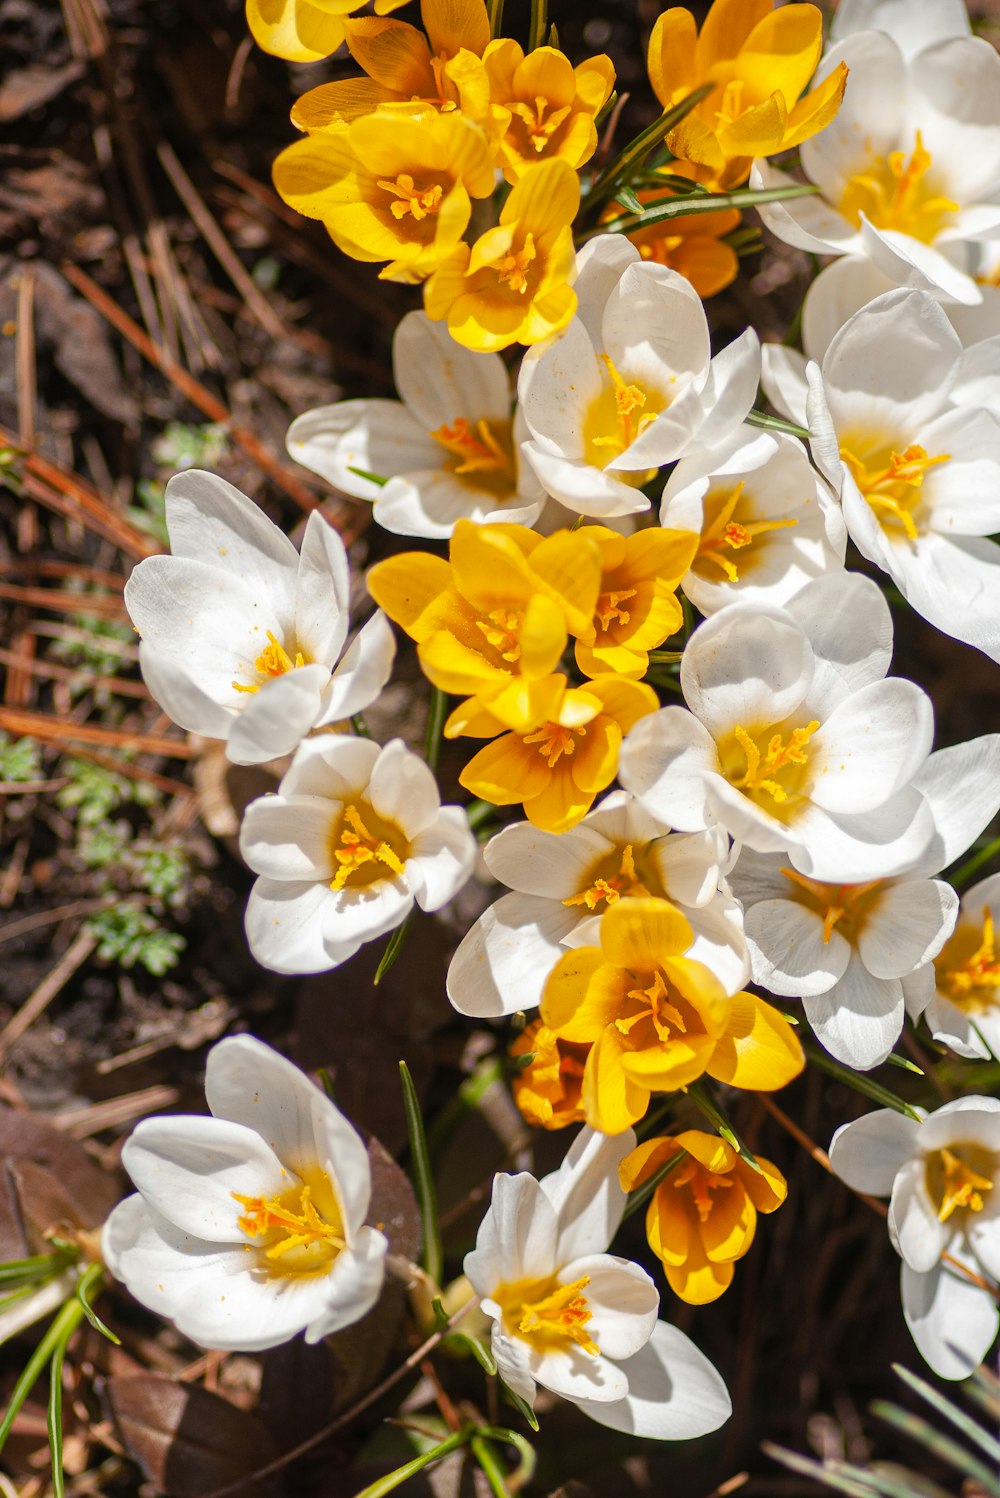 yellow and white daffodils in bloom during daytime